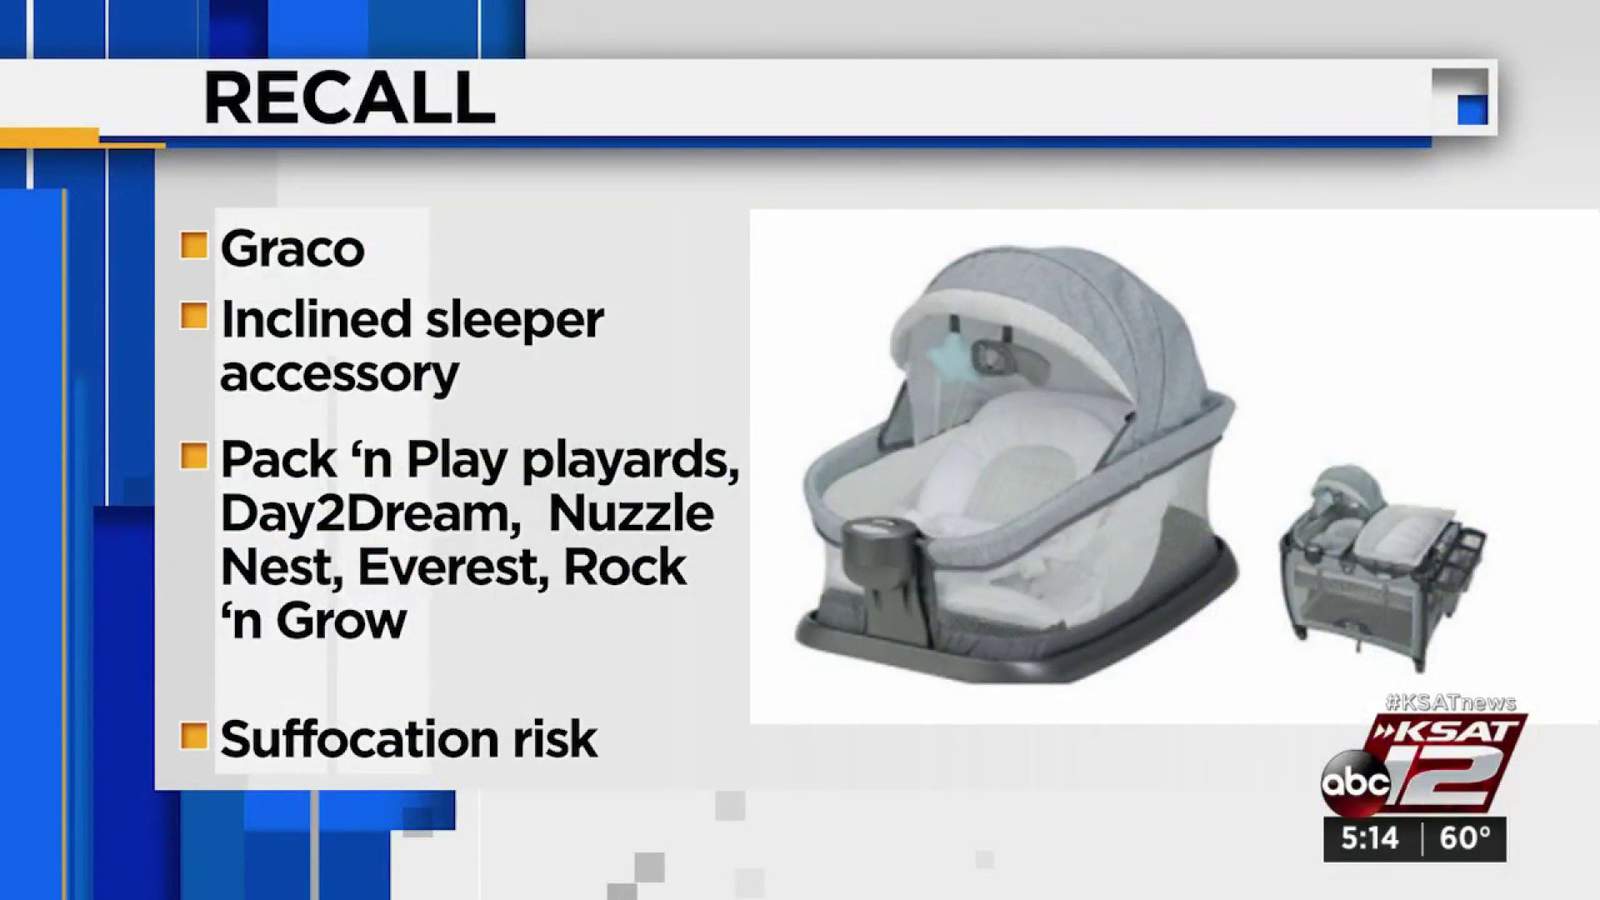 Graco recalls inclined sleepers for suffocation risk